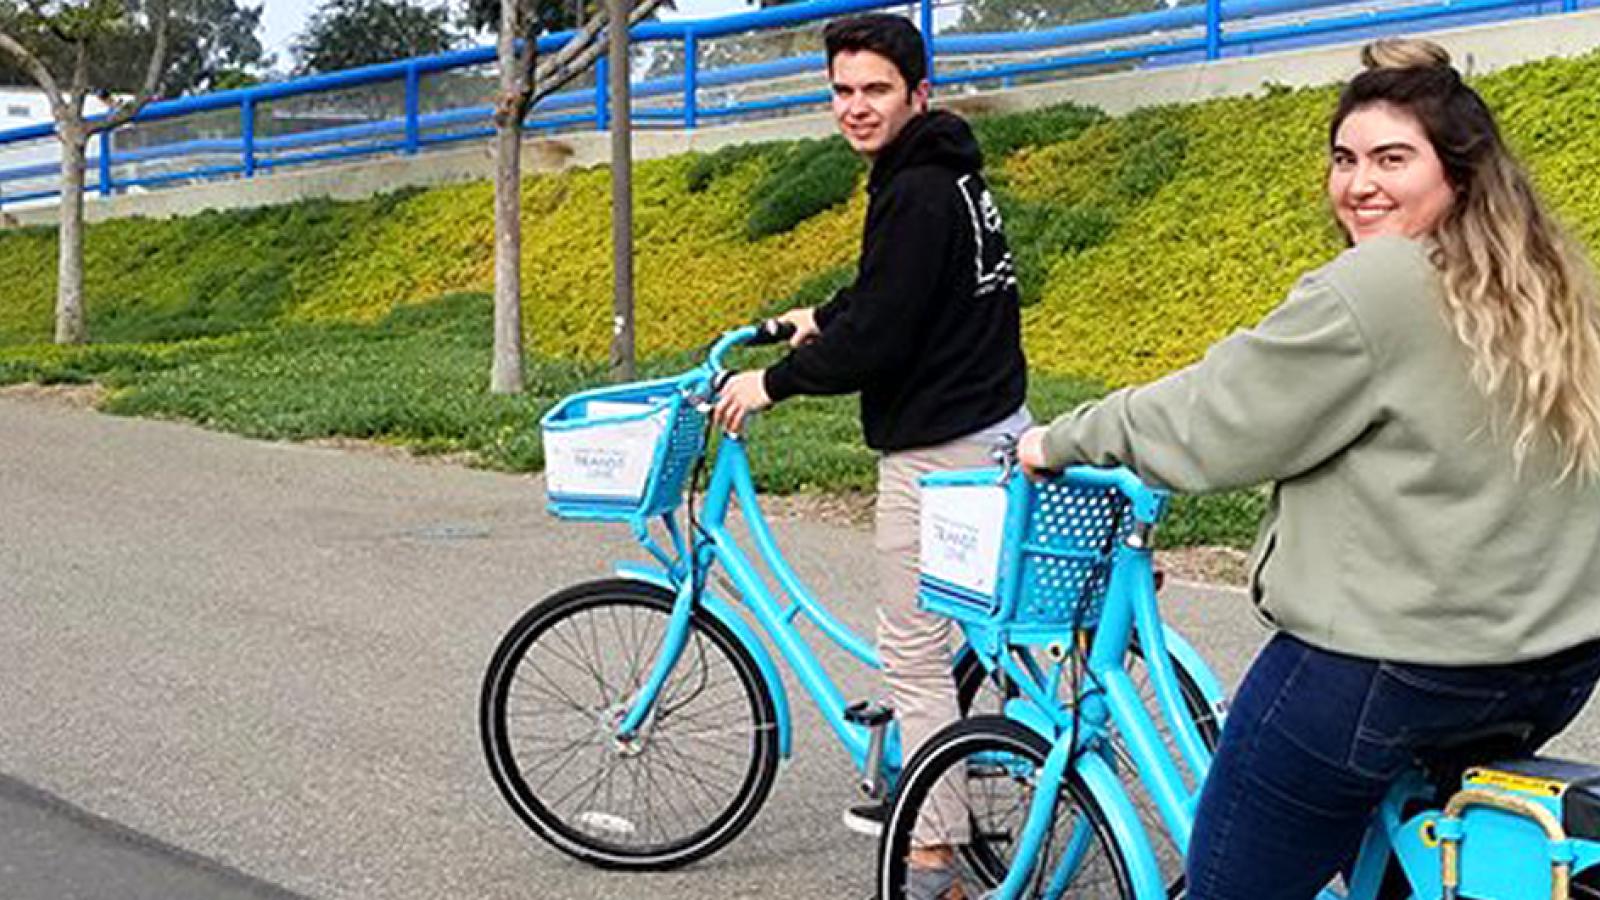 Two students riding on blue bikes